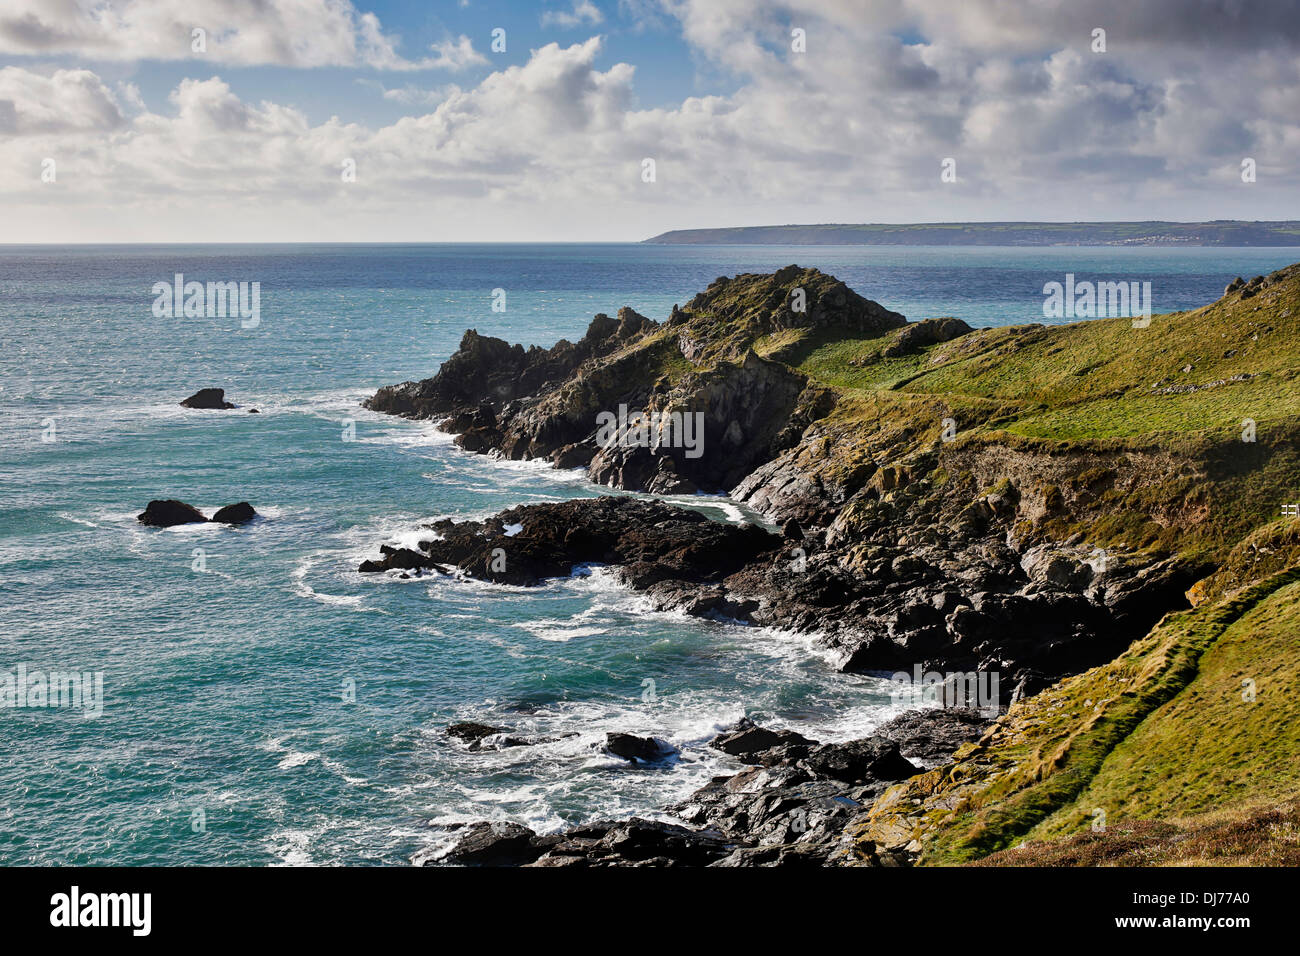 Cudden Point ; Mount's Bay, Cornwall, UK Banque D'Images